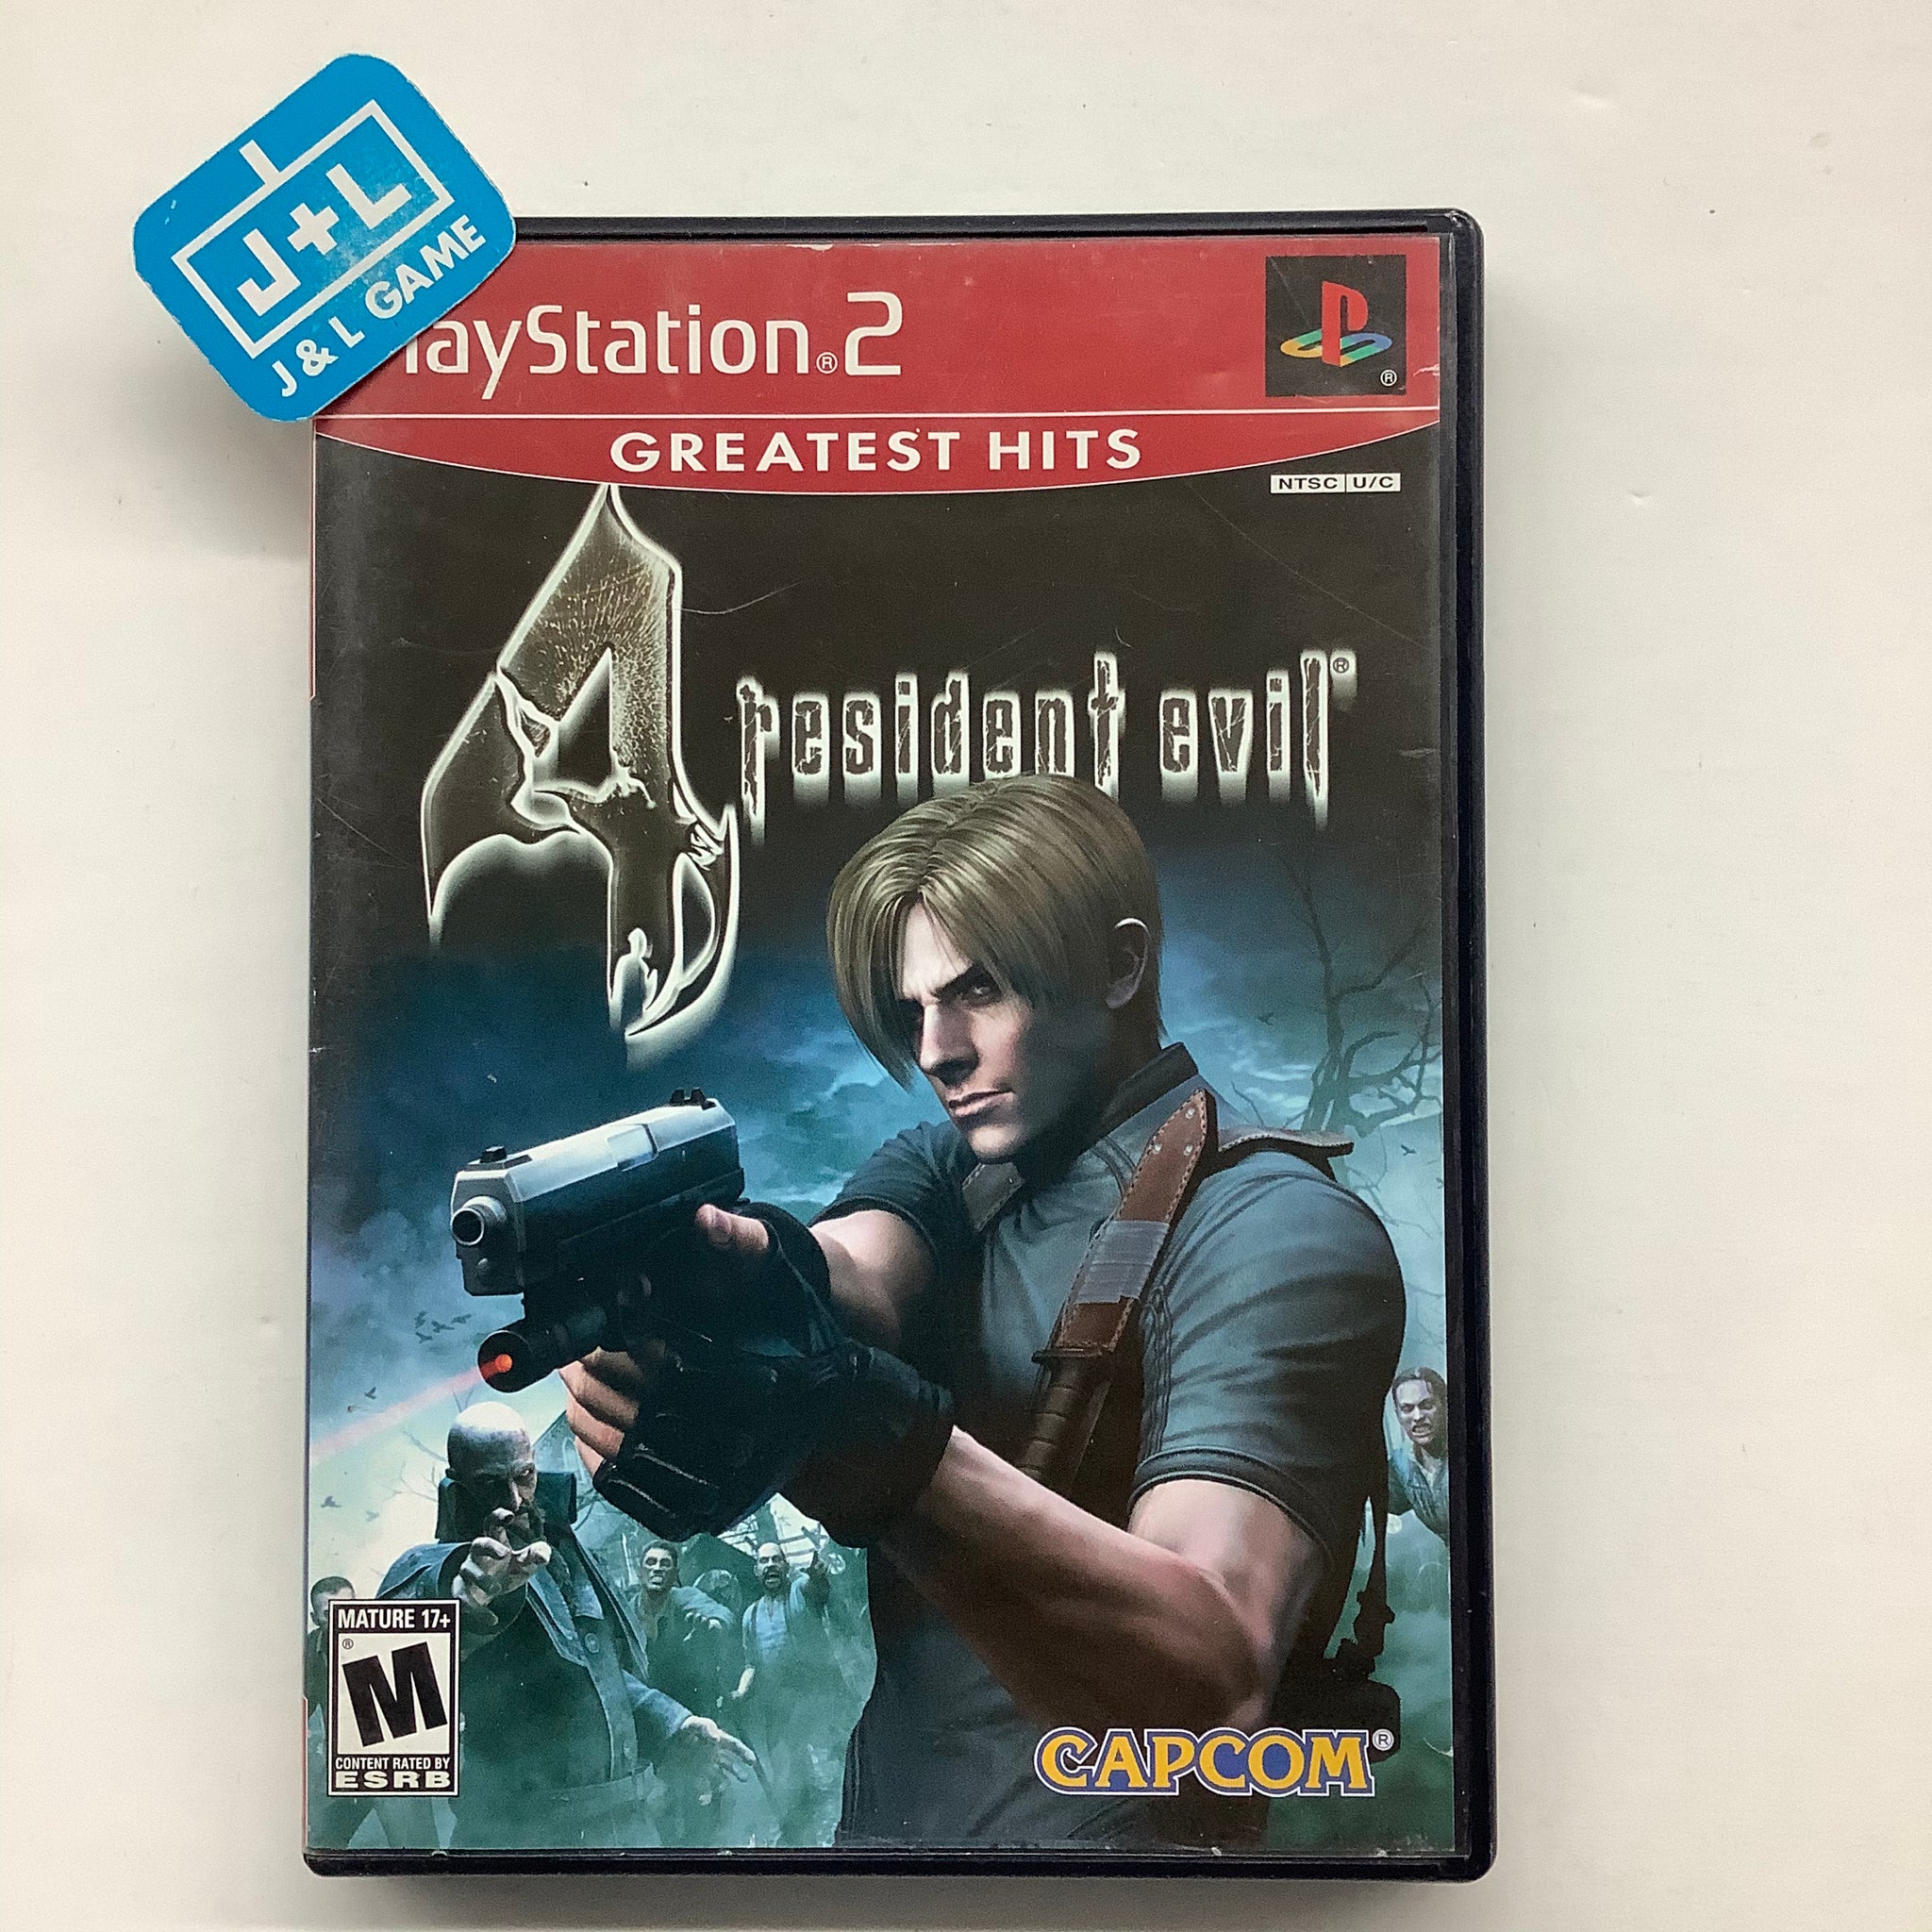 Resident Evil 4 is the Best Game Ever